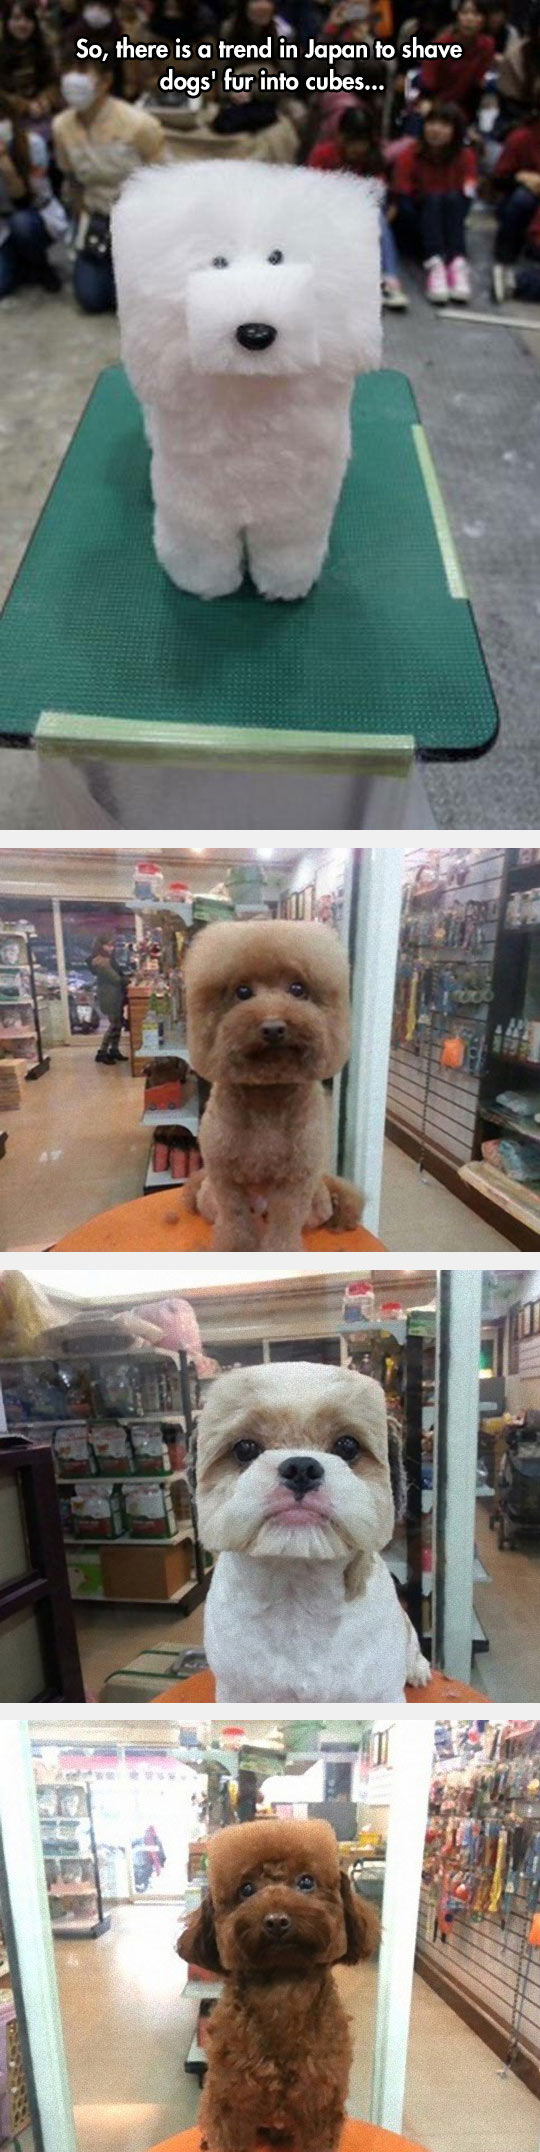 random pics -  square haircut dog - So, there is a trend in Japan to shave dogs' fur into cubes... 11